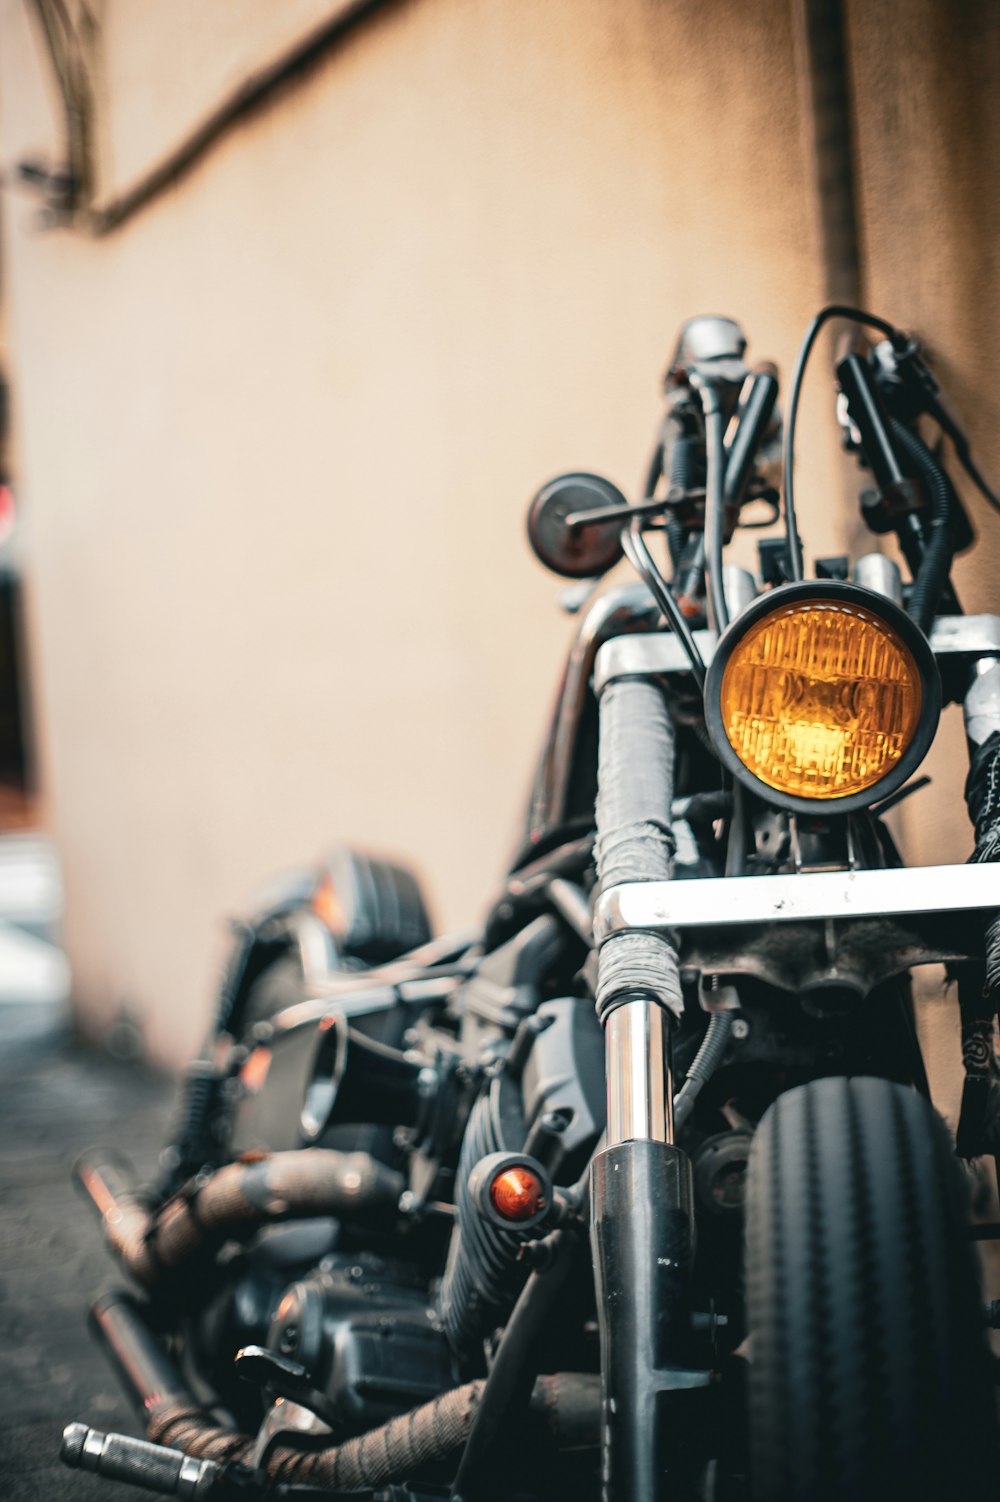 a close up of a motorcycle parked on a street